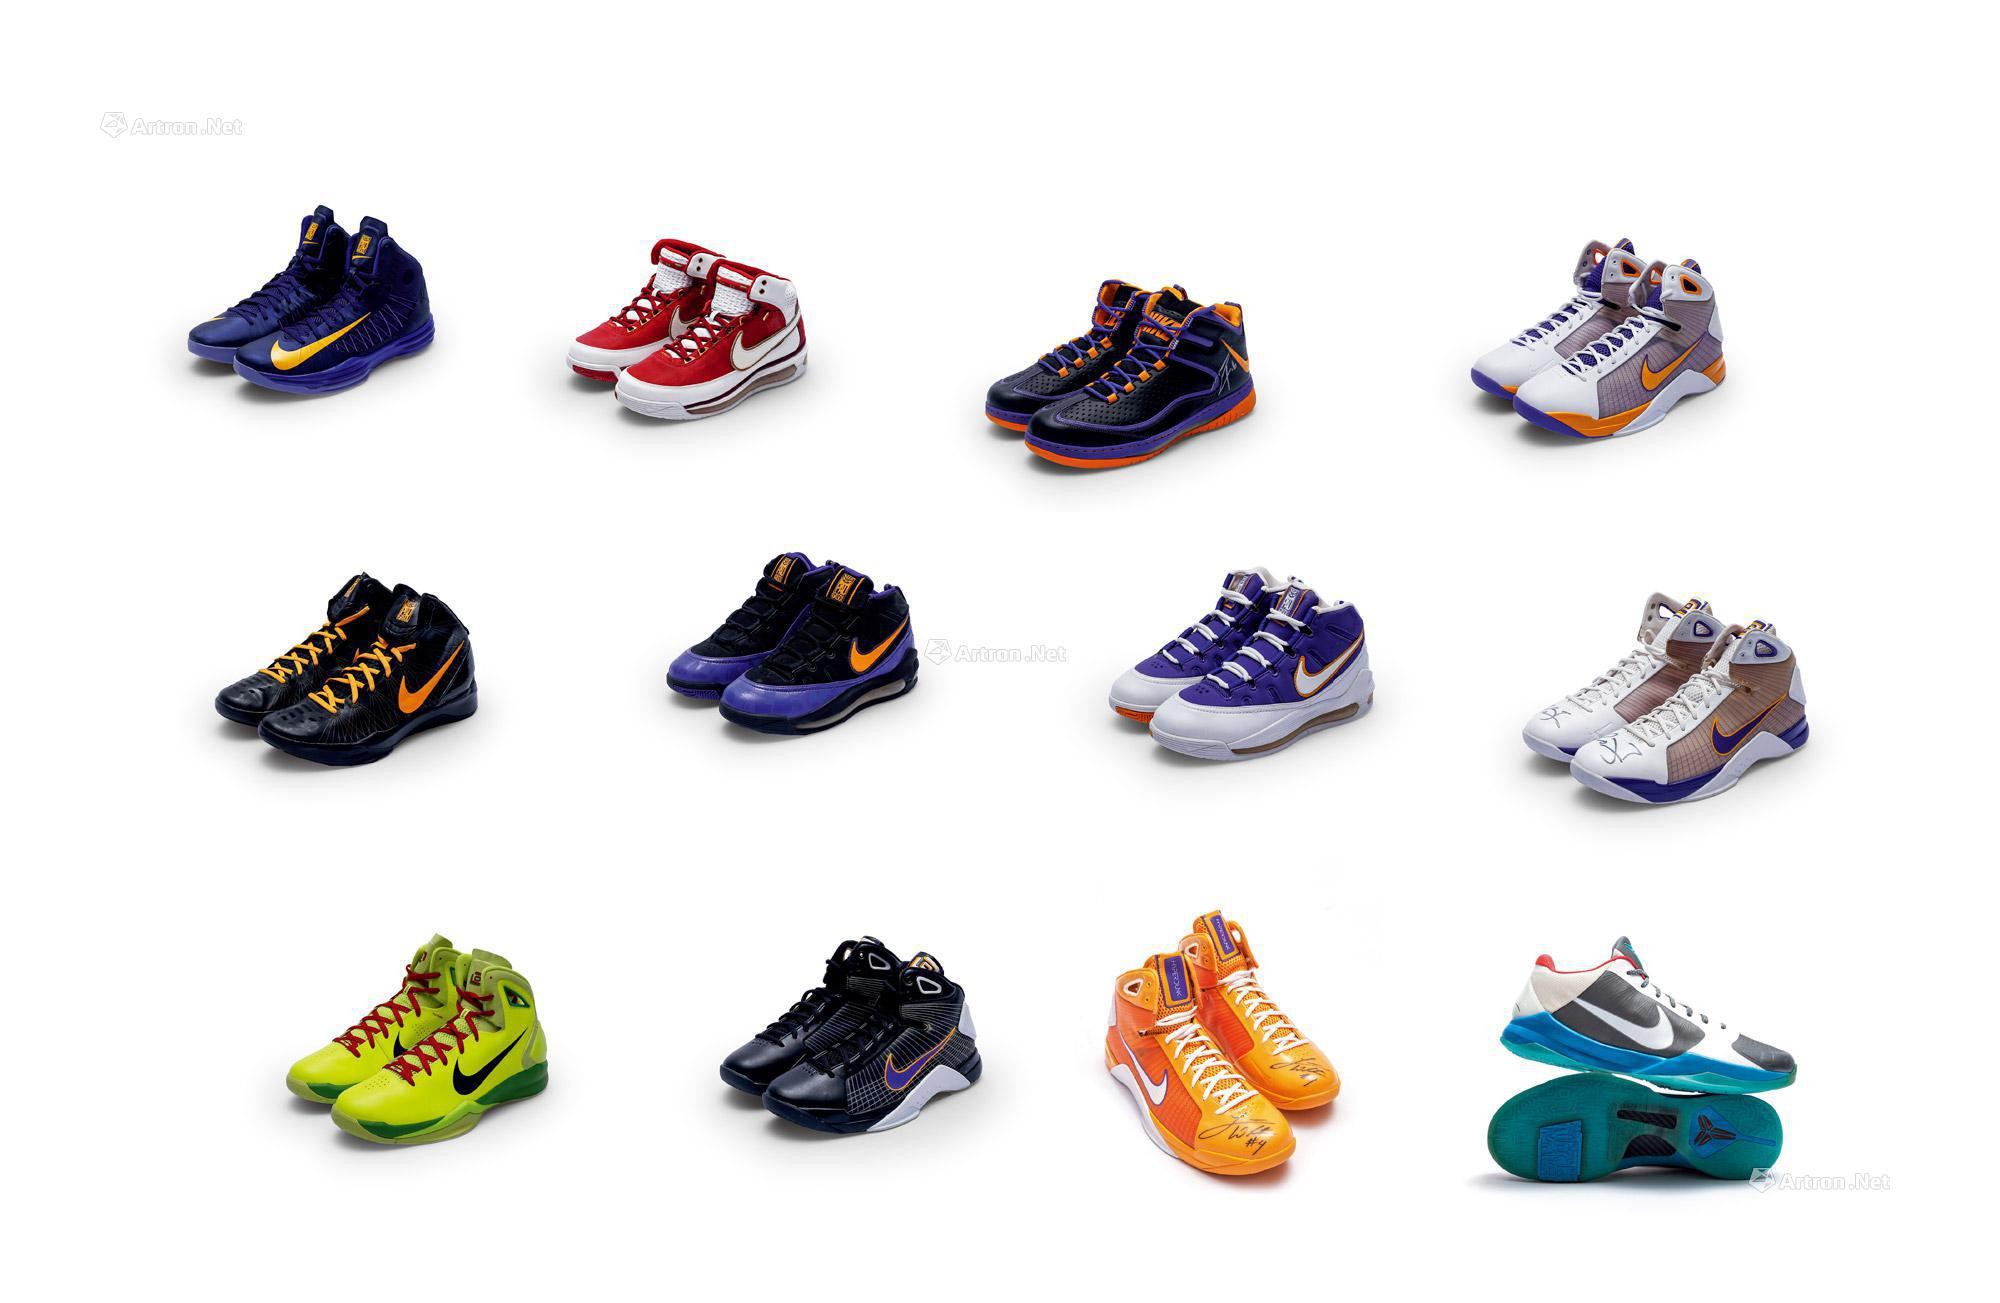 Los Angeles Lakers Exclusive Sneaker Collection  12 Pairs of Player Exclusive Sneakers